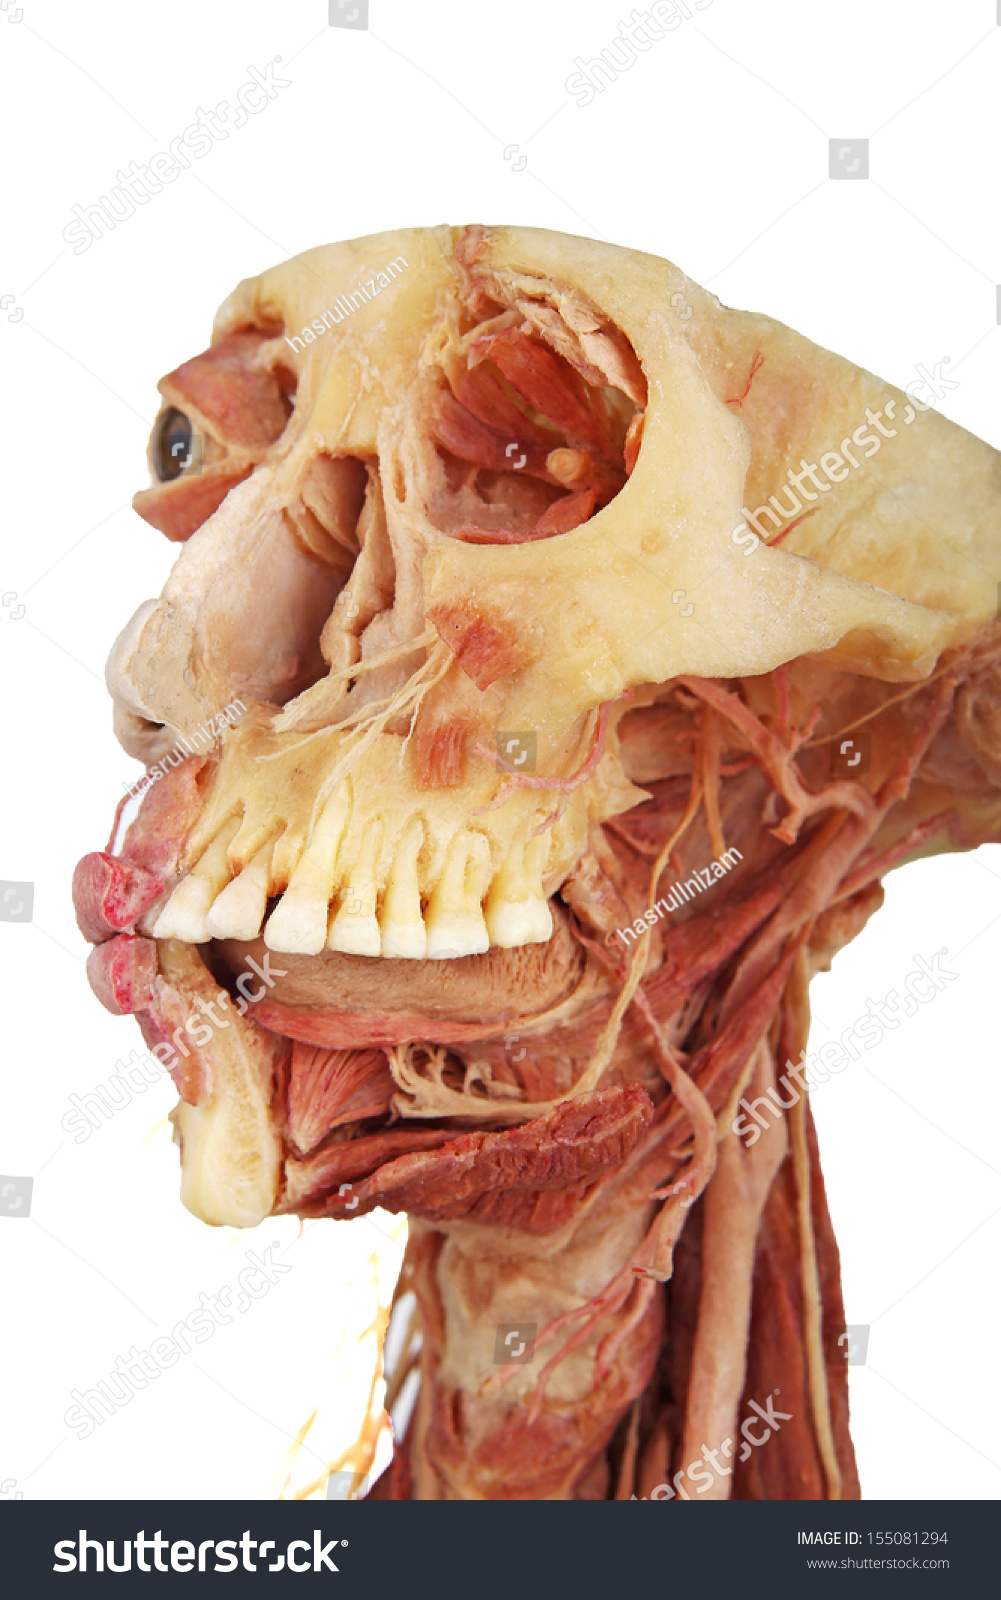 Real Human Face Anatomy Stock Photo (Edit Now) 155081294 - Shutterstock